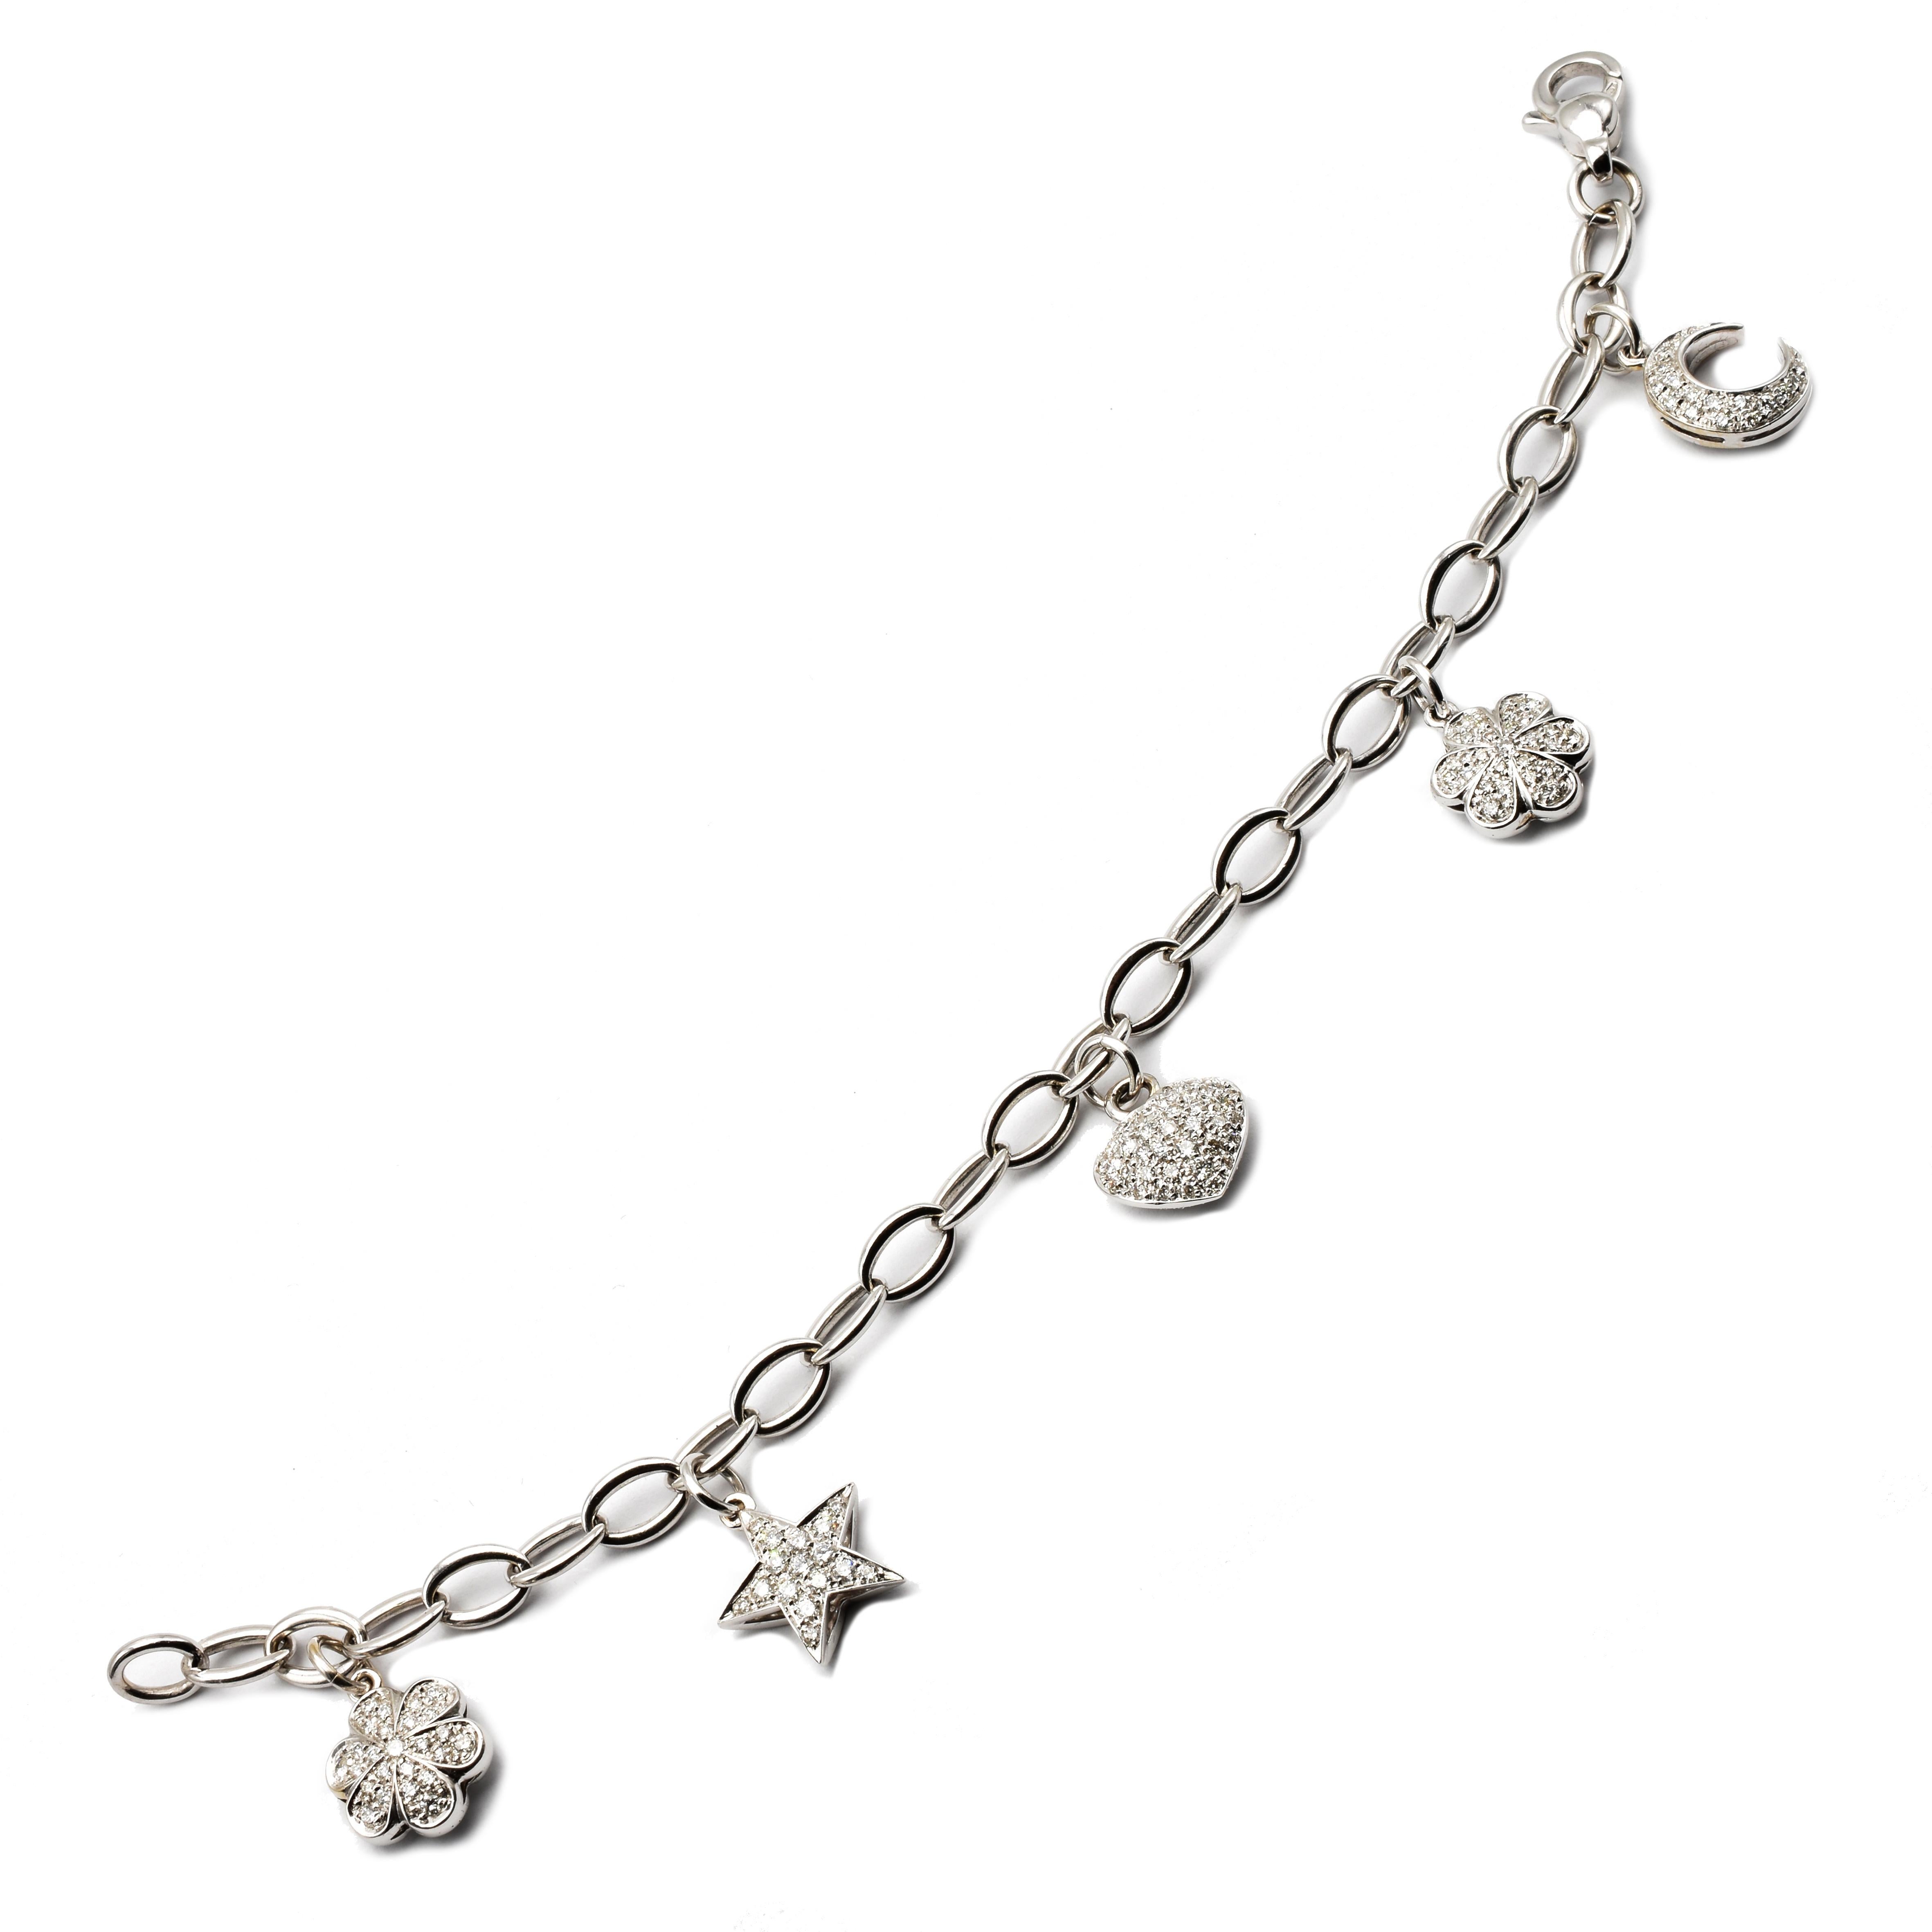 Round Cut Diamond White Gold Charms Bracelet, Made in Italy For Sale